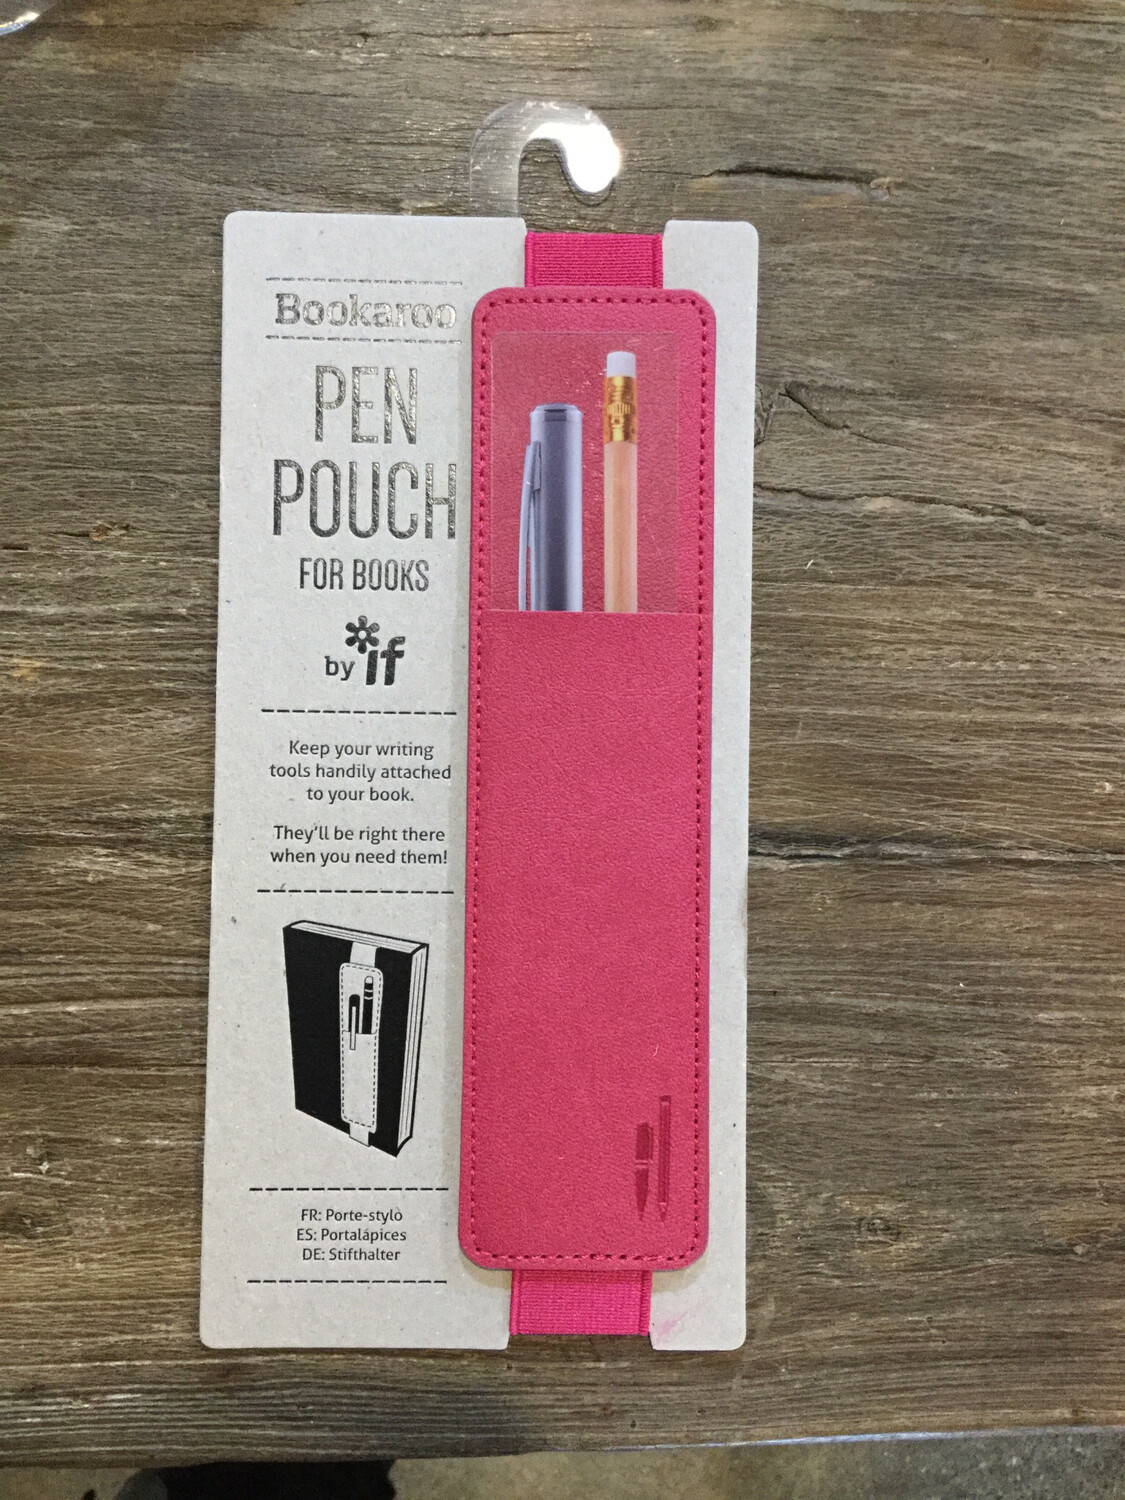 Pen Pouch For Notebooks.   - Bookaroo